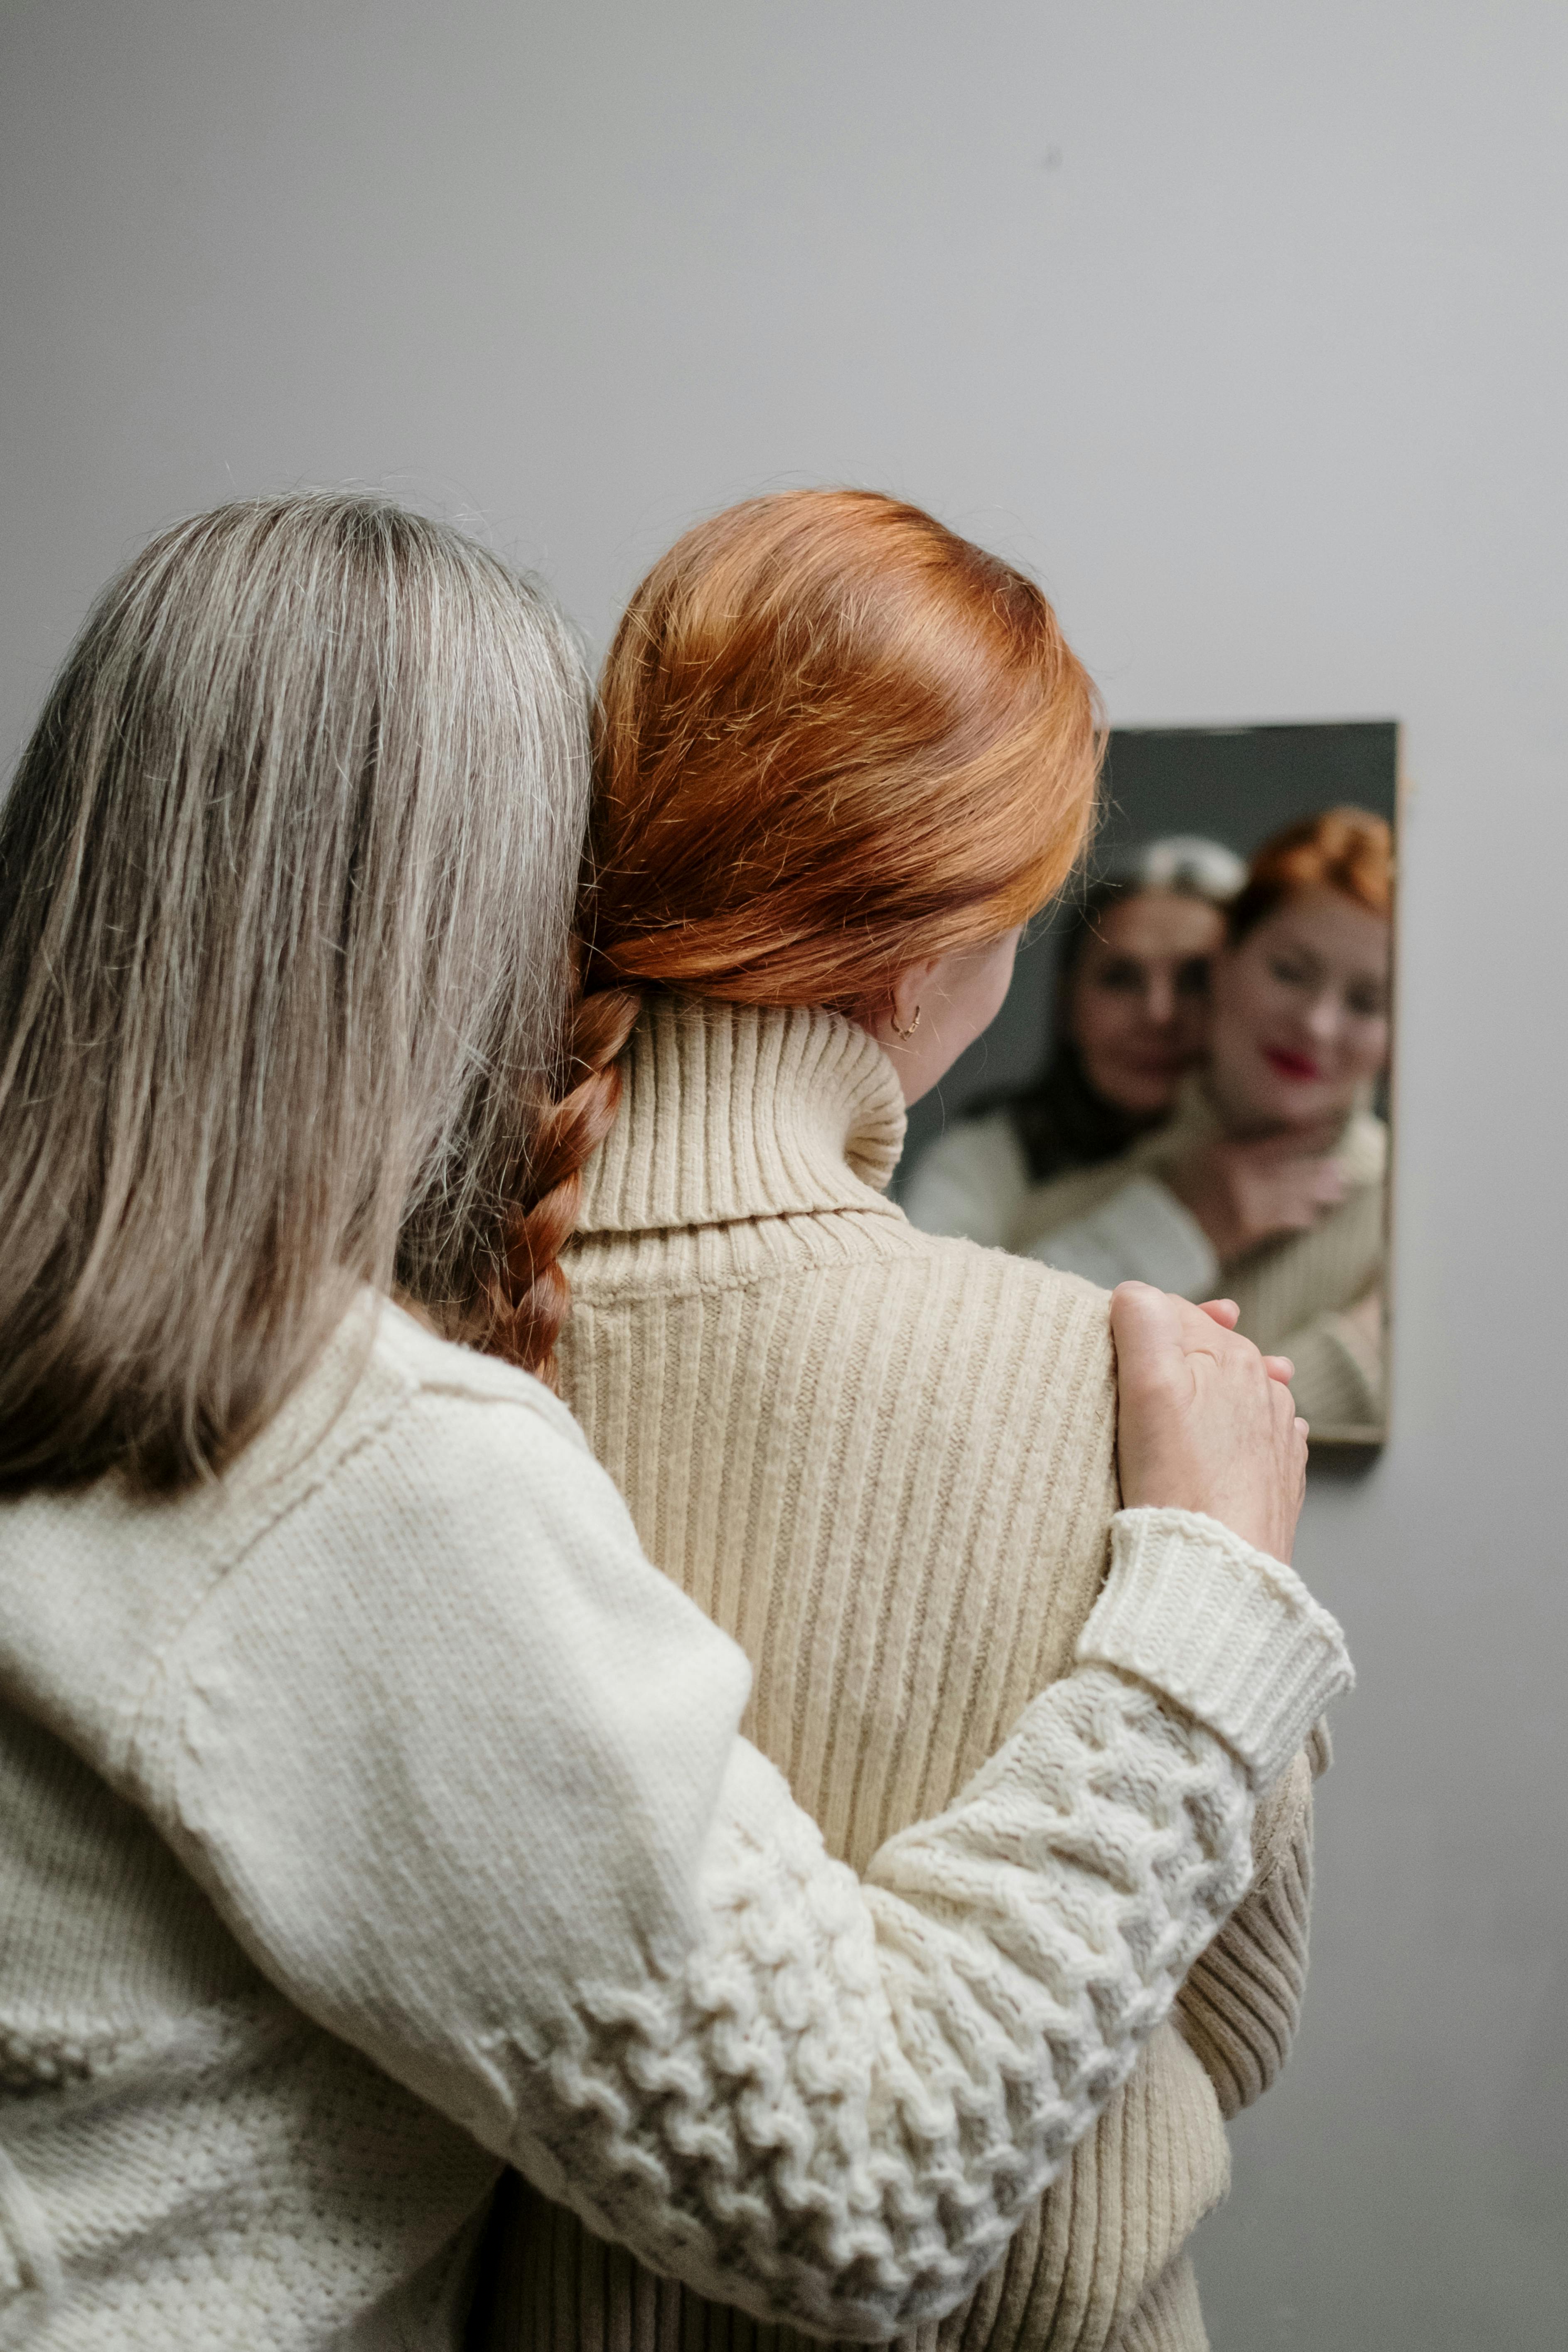 An older woman embracing a younger one while looking in the mirror | Source: Pexels